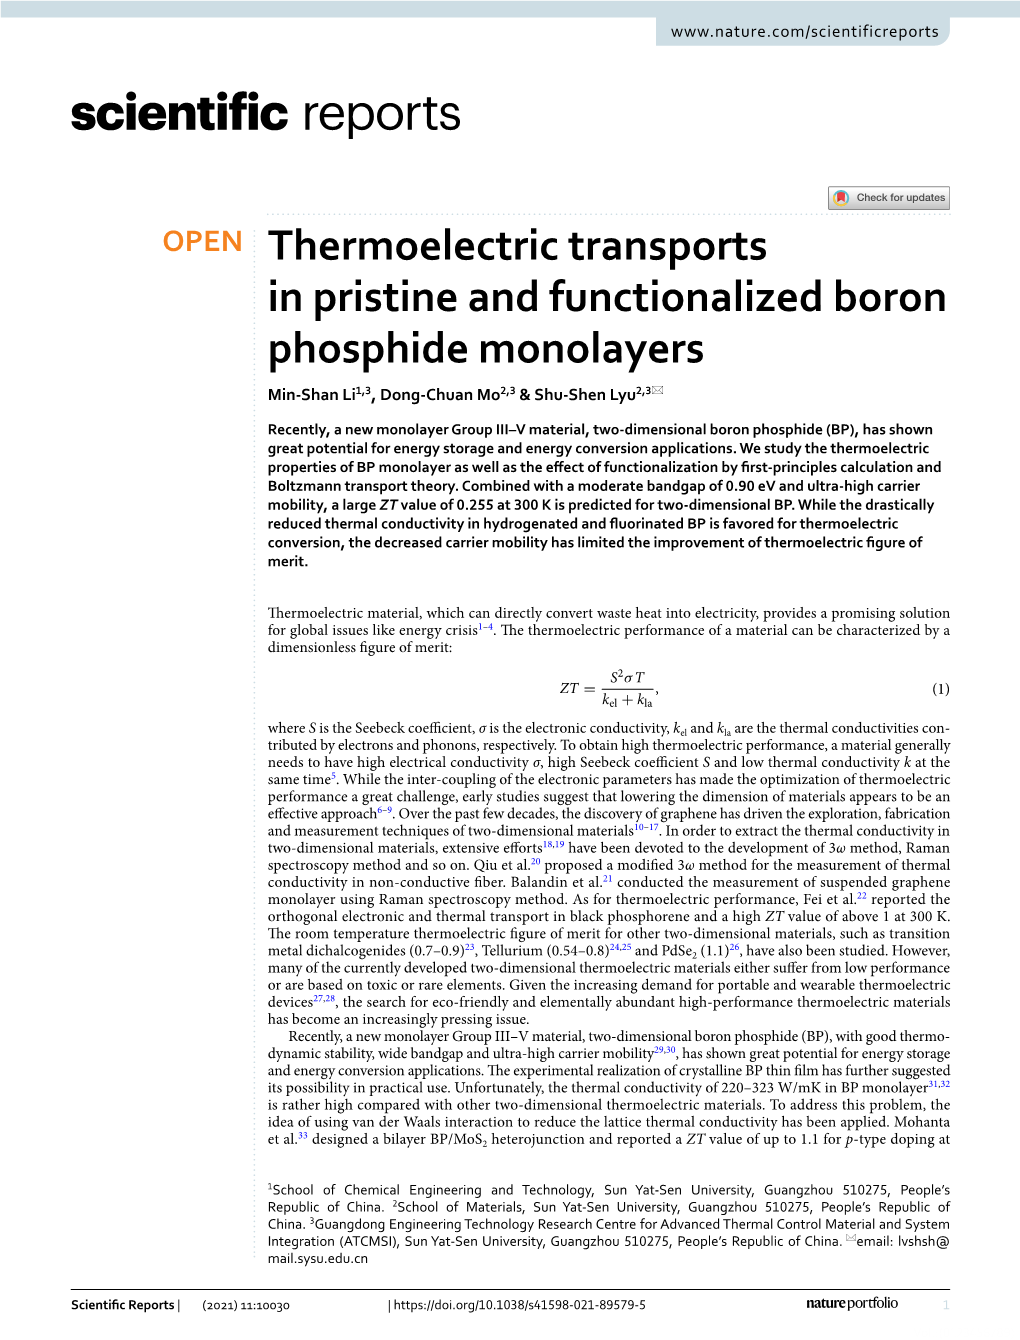 Thermoelectric Transports in Pristine and Functionalized Boron Phosphide Monolayers Min‑Shan Li1,3, Dong‑Chuan Mo2,3 & Shu‑Shen Lyu2,3*